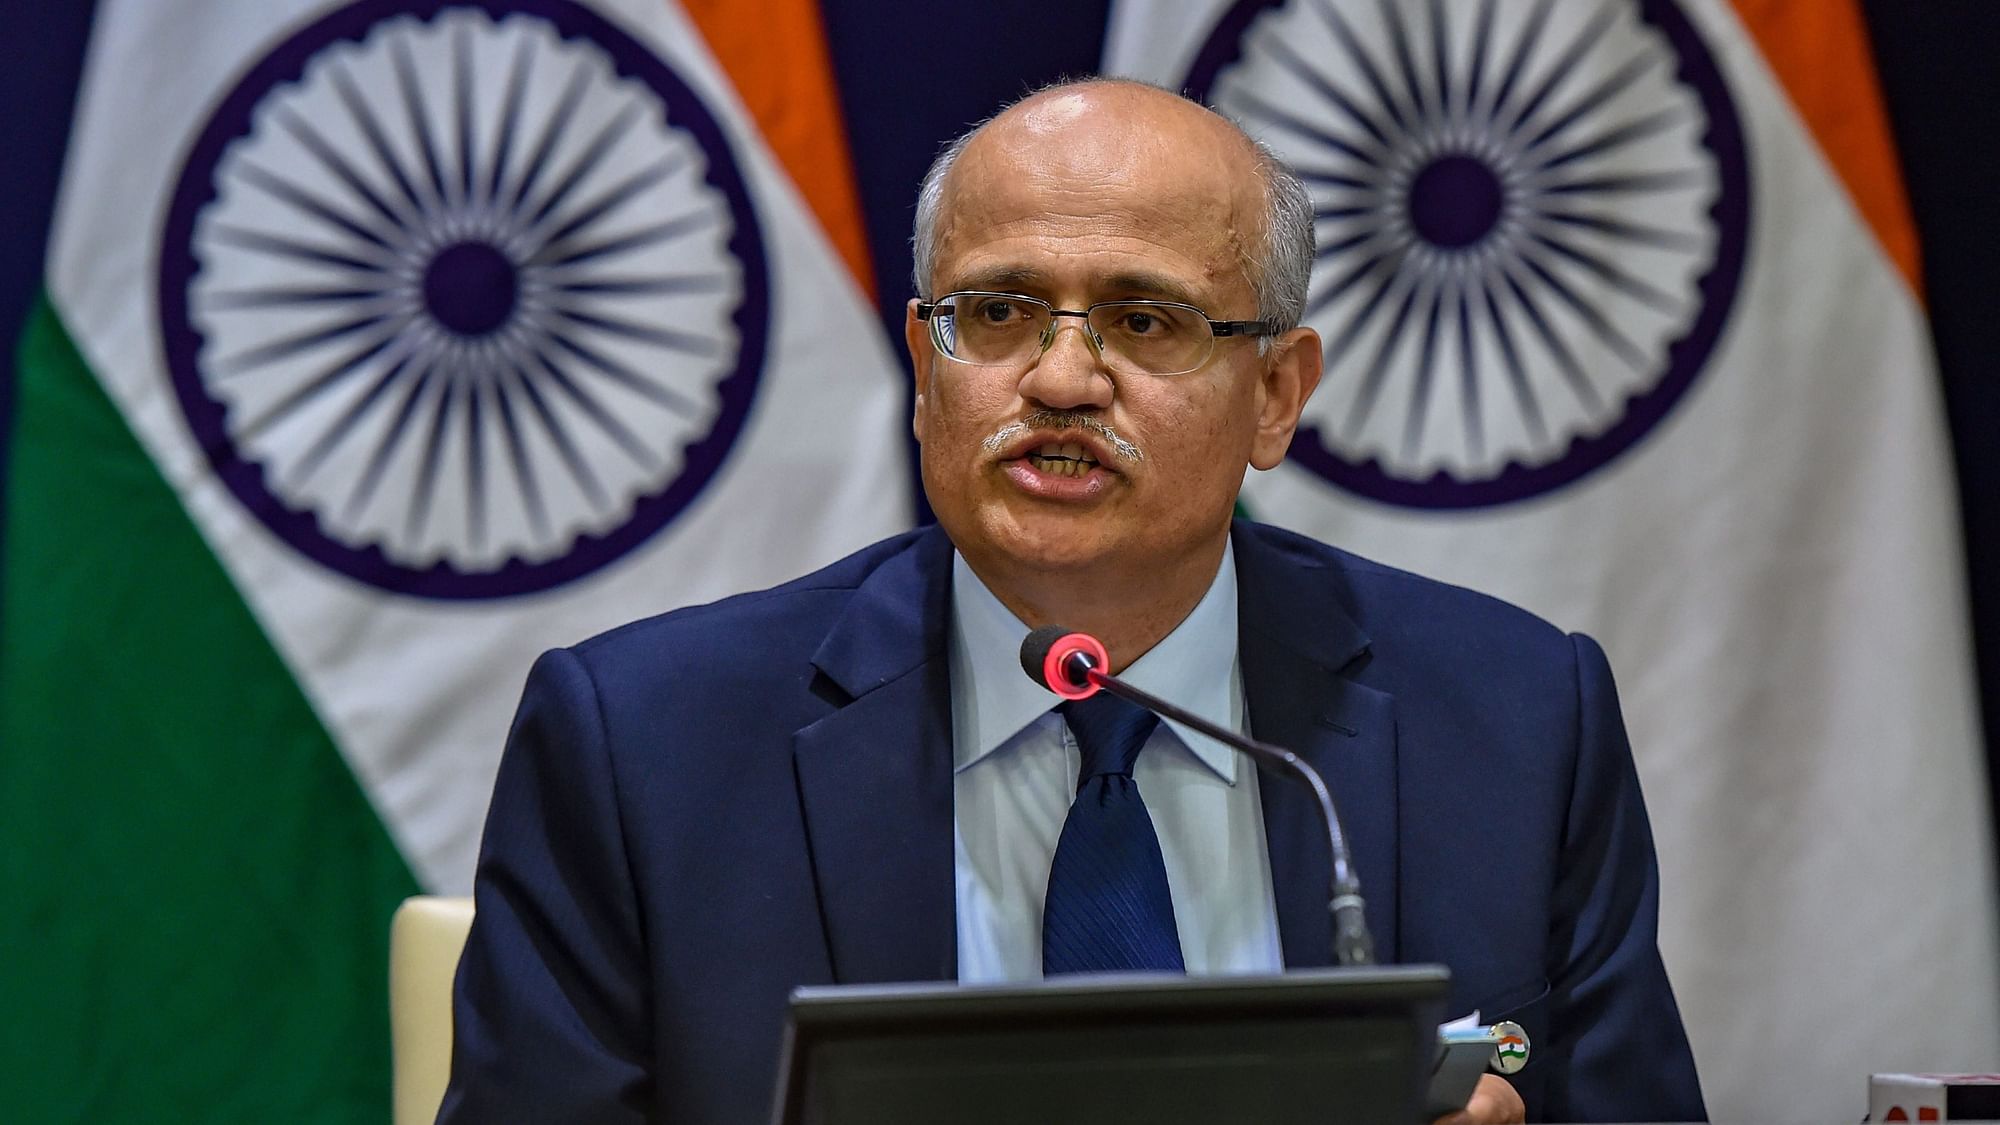 Foreign Secretary Vijay Gokhale will begin his two-day visit to China on Sunday, 21 April.